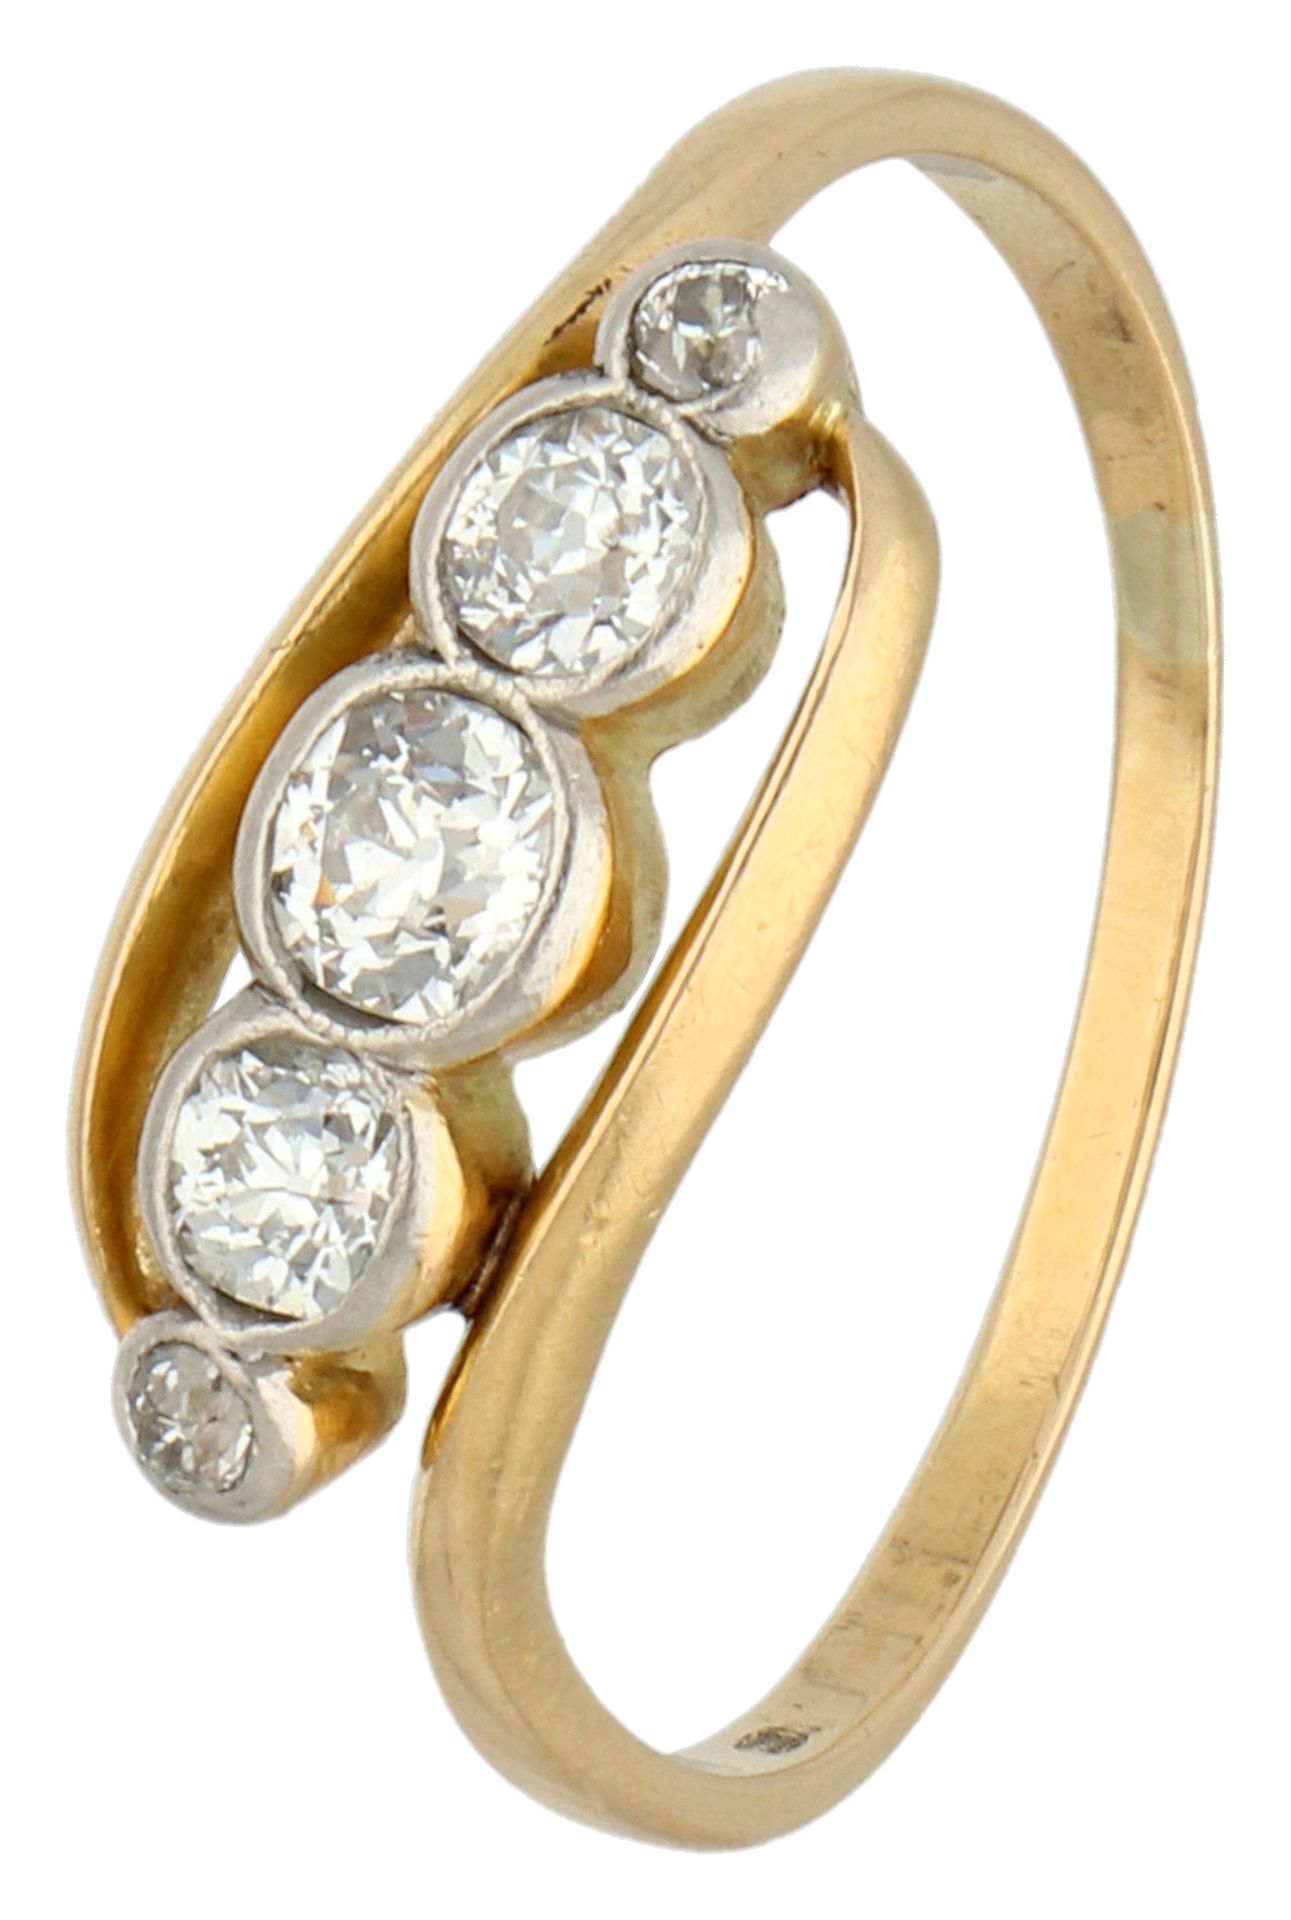 No reserve - 18K Yellow gold 5-stone ring set with approx. 0.25 ct. old European cut diamonds.